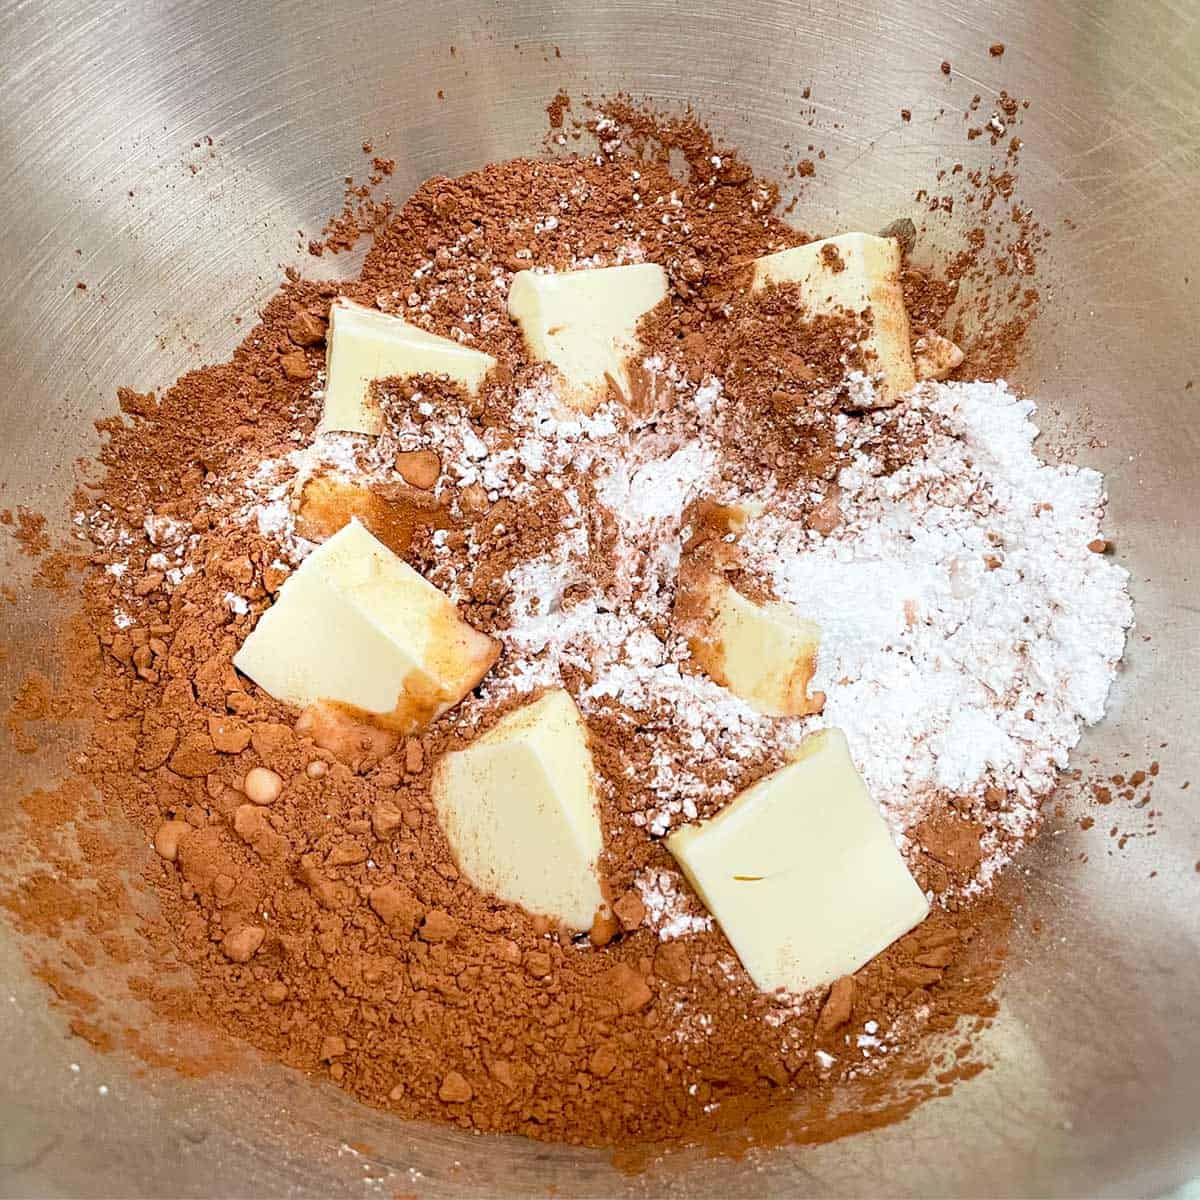 All ingredients to make chocolate icing in the mixer bowl including butter, cocoa, and powdered sugar.